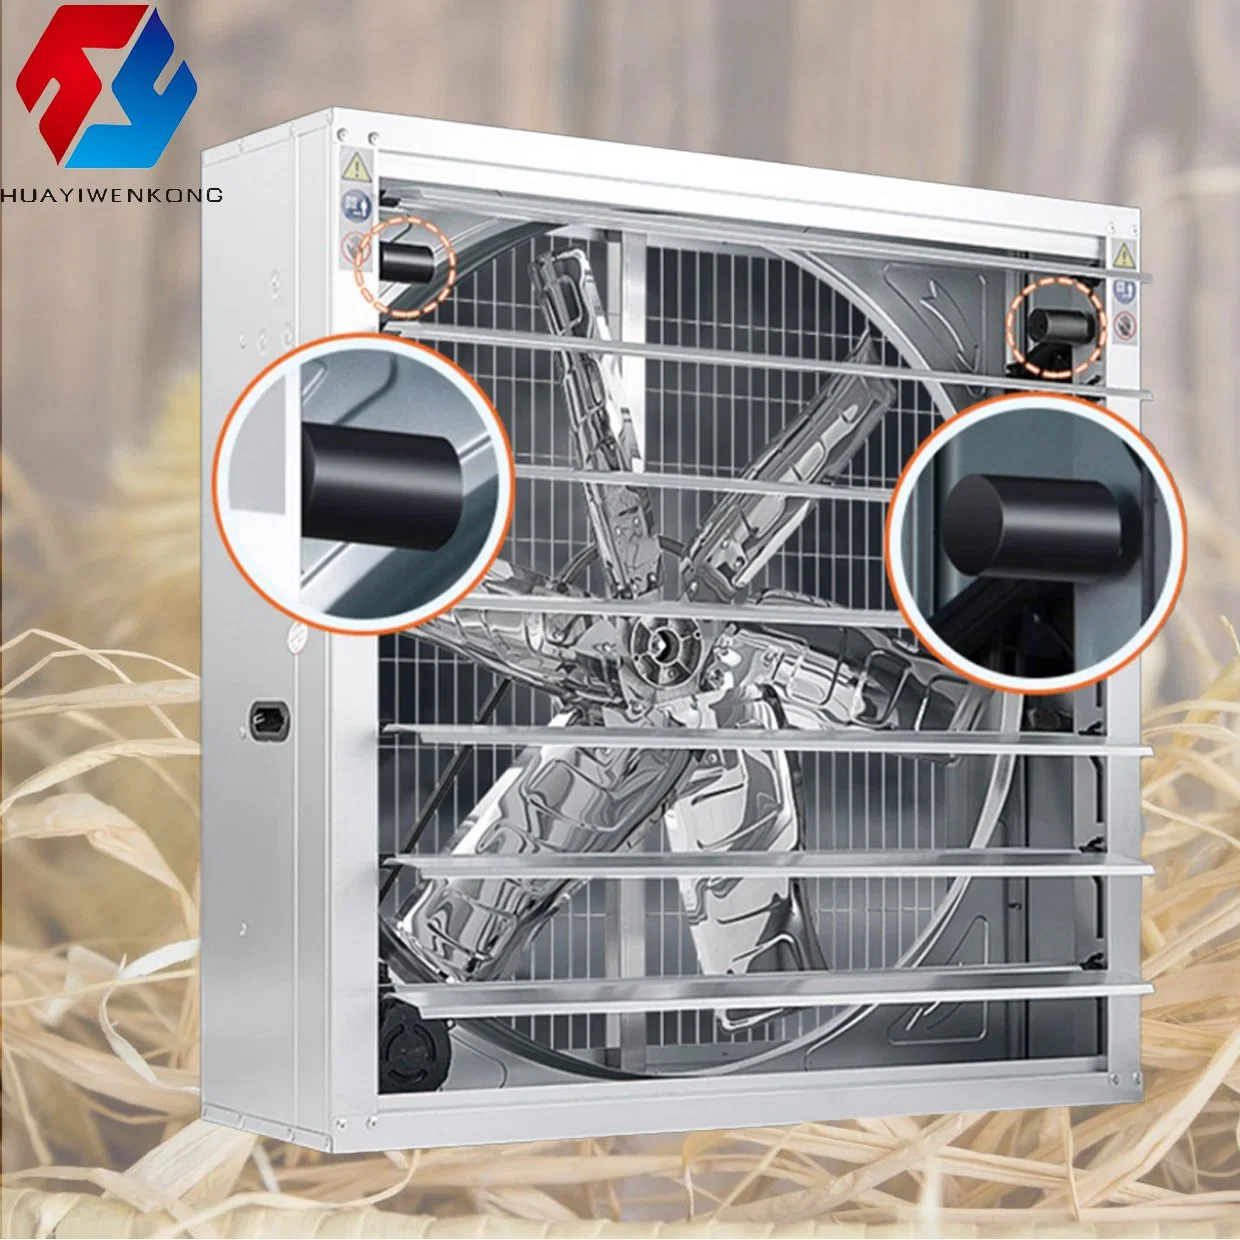 Drop Hammer Ventilation Exhaust Fan Air Blower for Agriculture Greenhouse Ventilation Cooling System